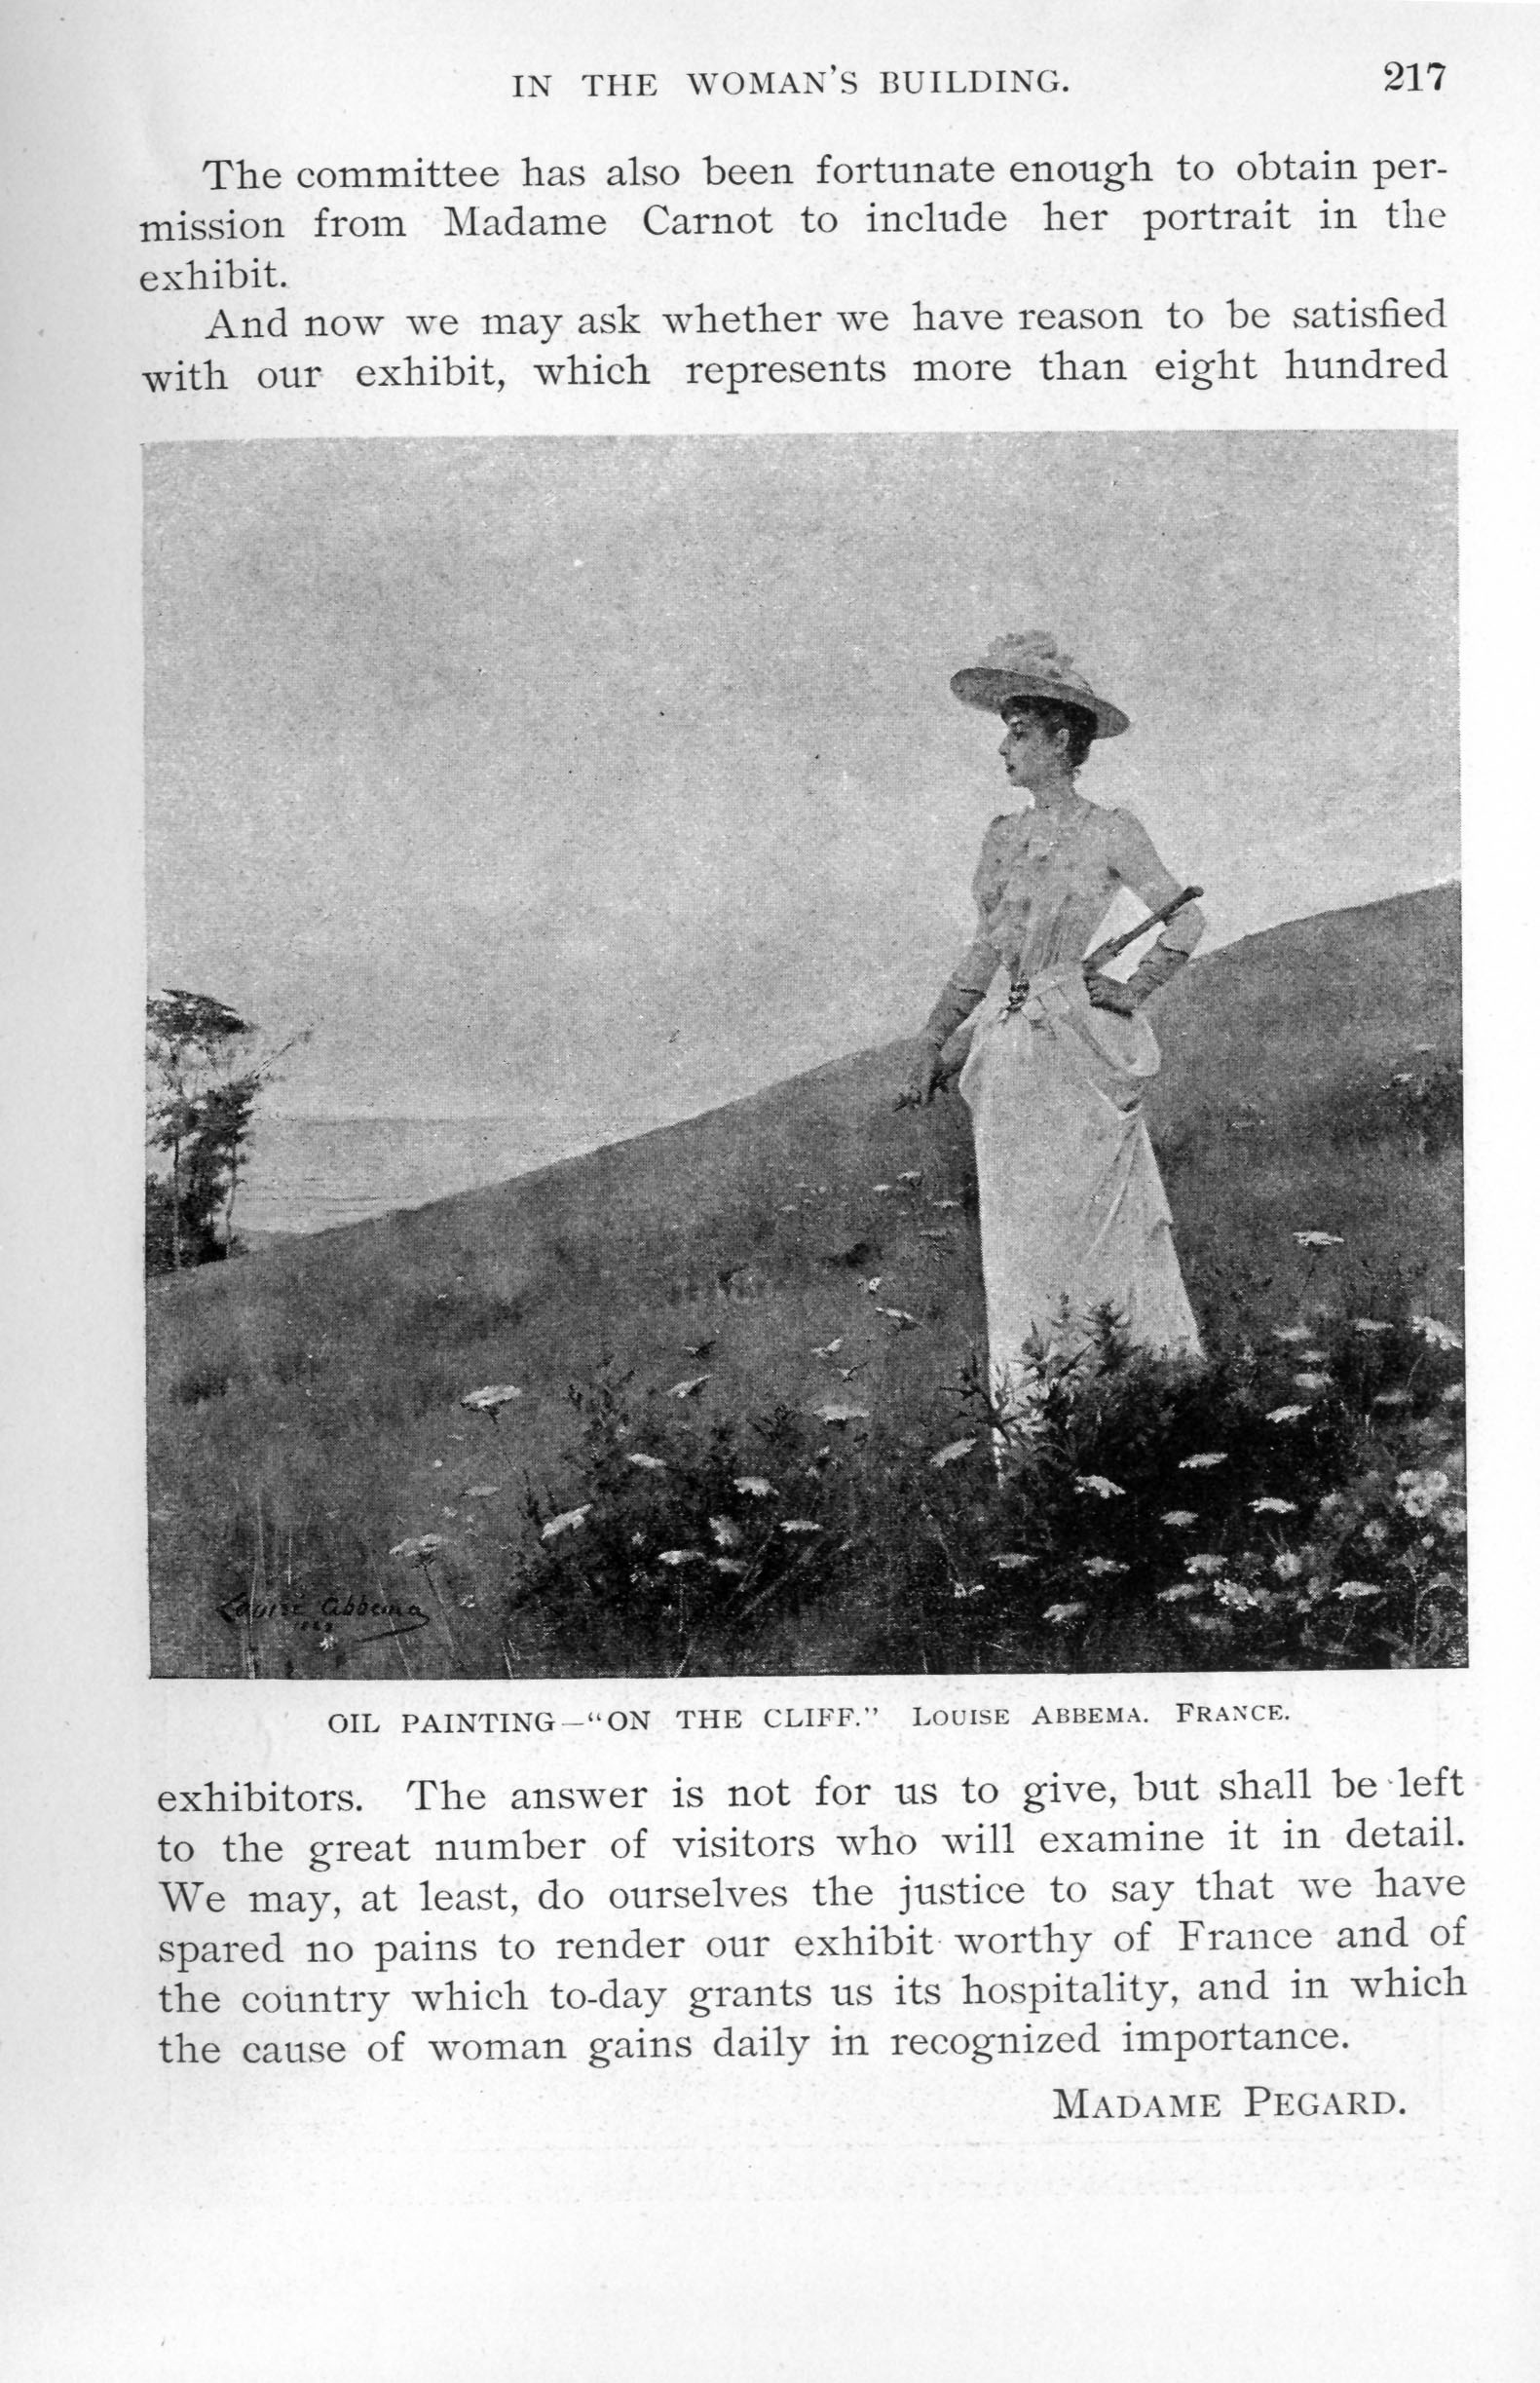 woman in dress and hat walking through a meadow